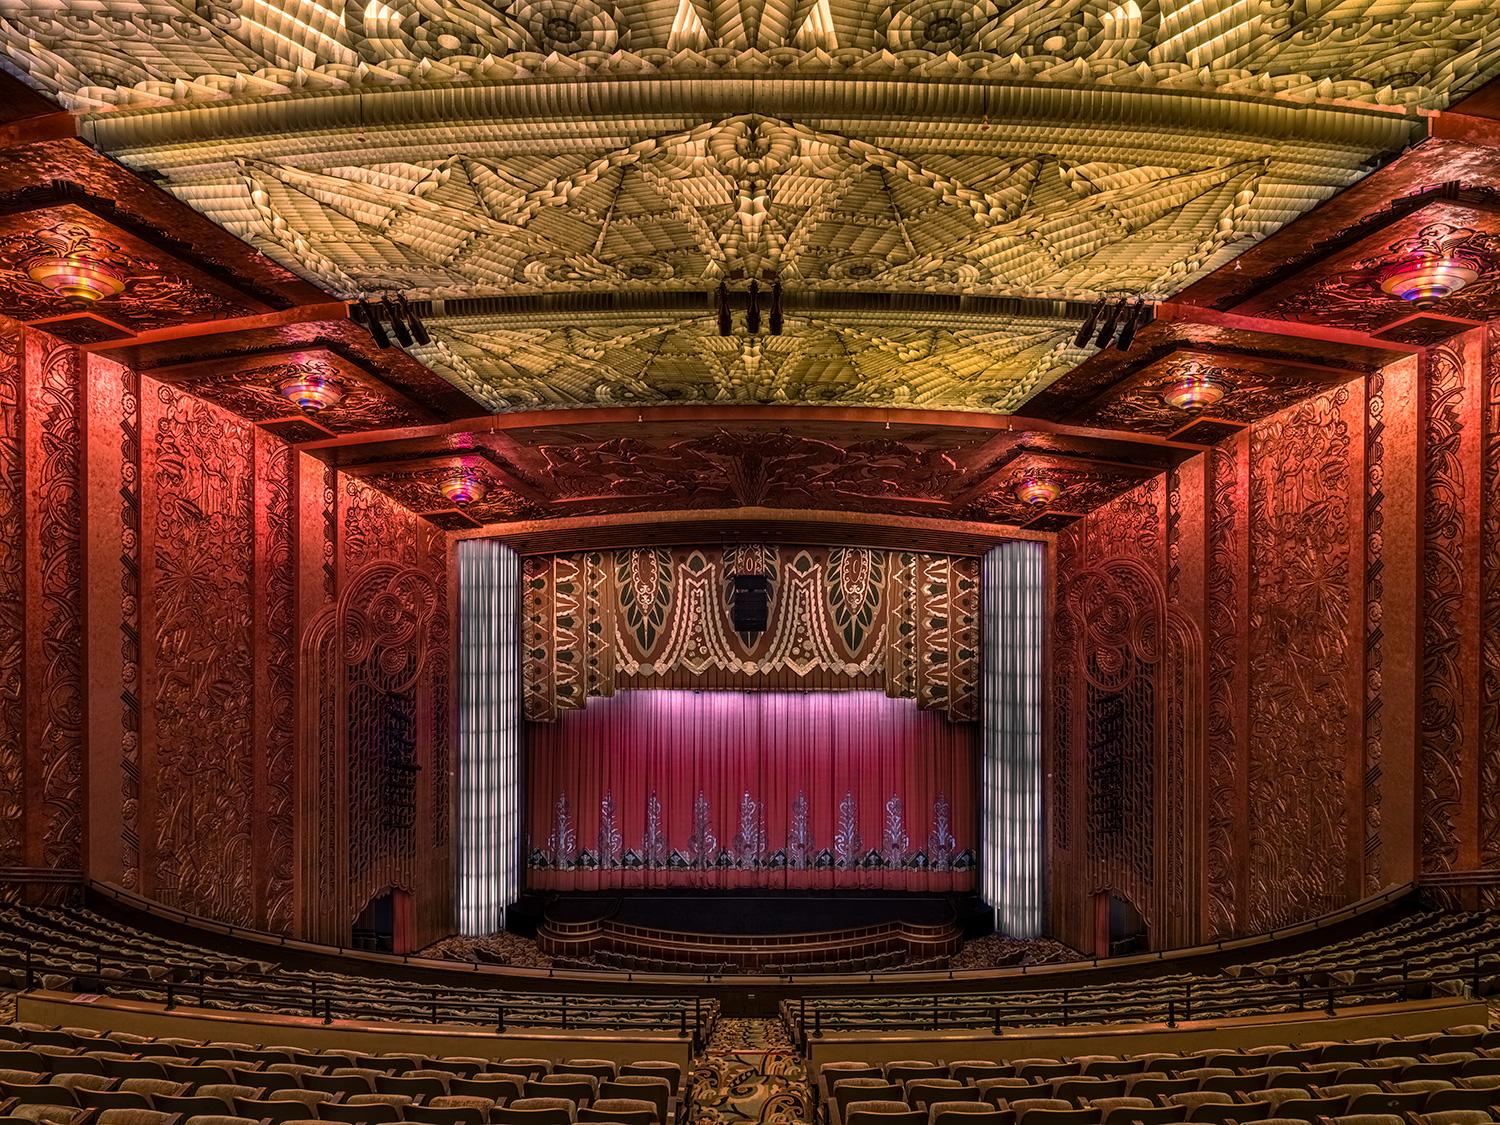 Finished in 1928 by Scottish immigrant and architect Thomas W. Lamb in a majestically ornate Spanish Baroque style, it served the downtown community as a Loew’s movie house with its own theatre orchestra and accompanying organ. During its heyday in